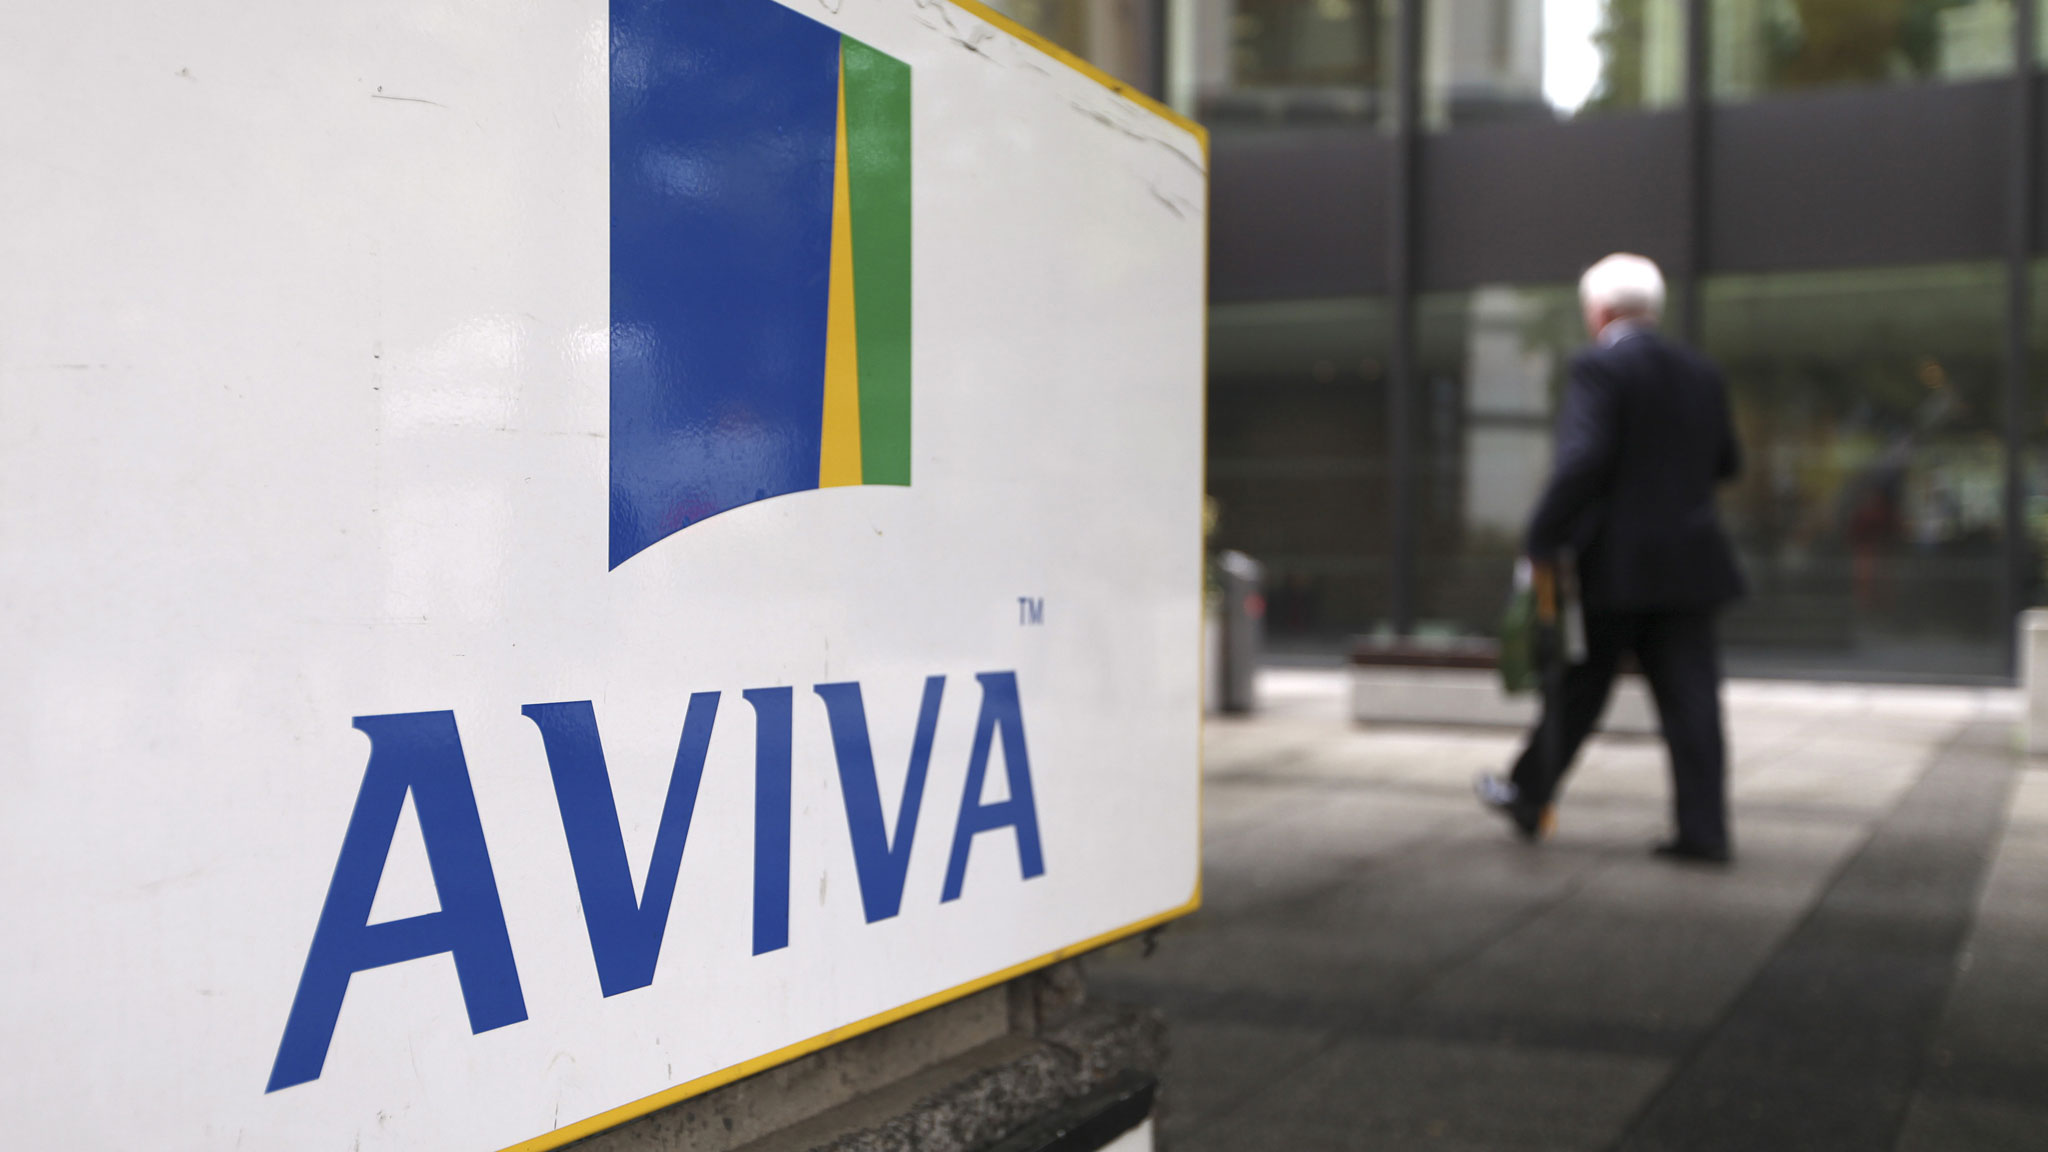 [Case Study] How email marketing increased AVIVA’s quote rates by 48% and how it can work for you.